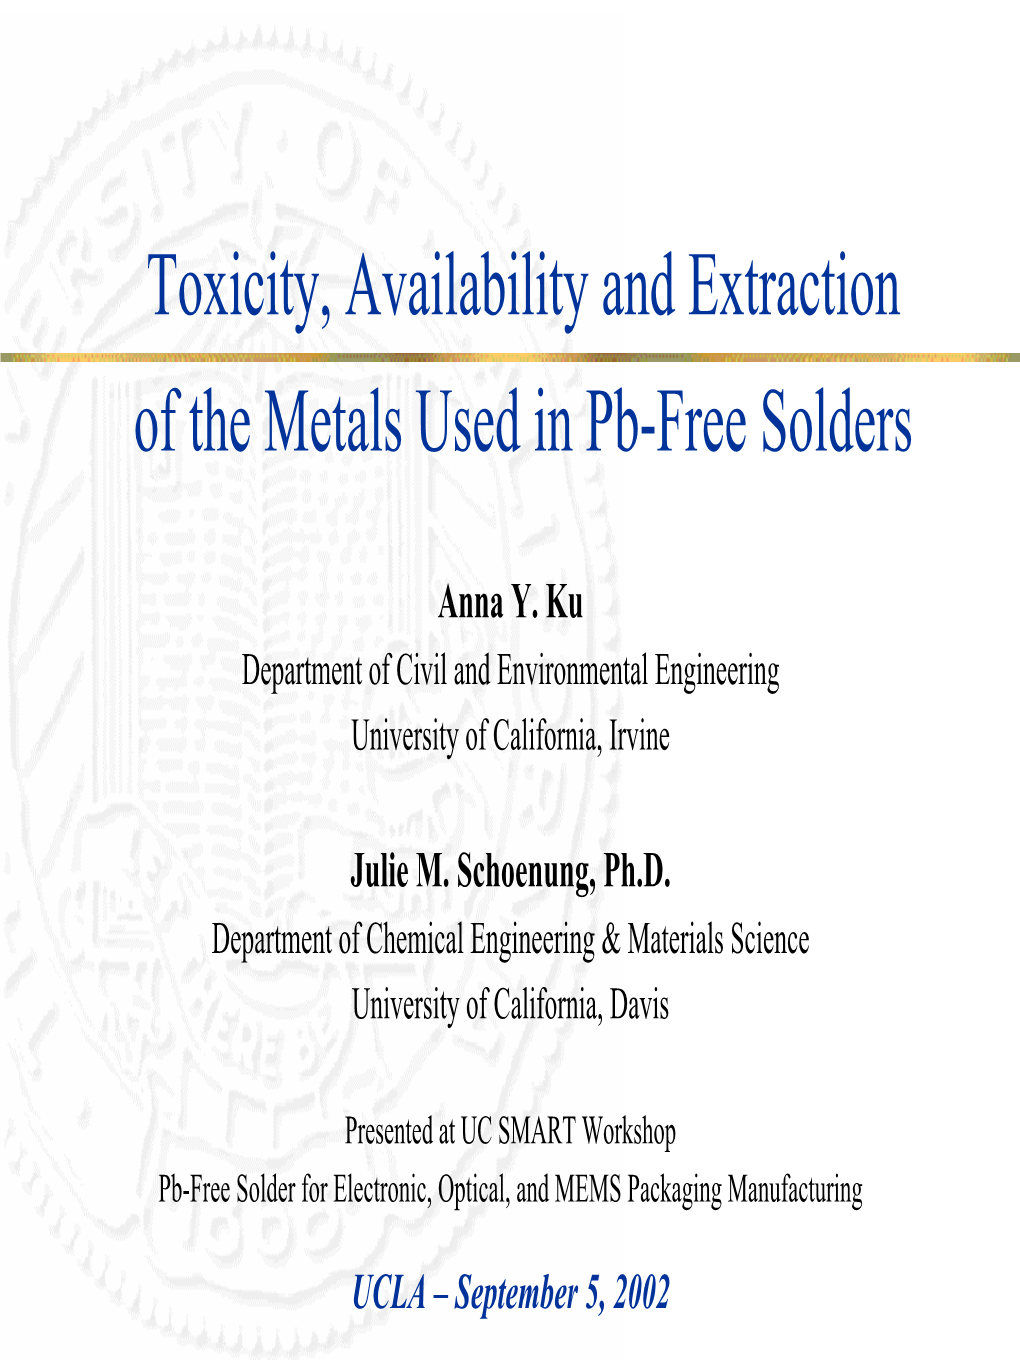 Toxicity, Availability and Extraction of the Metals Used in Pb-Free Solders